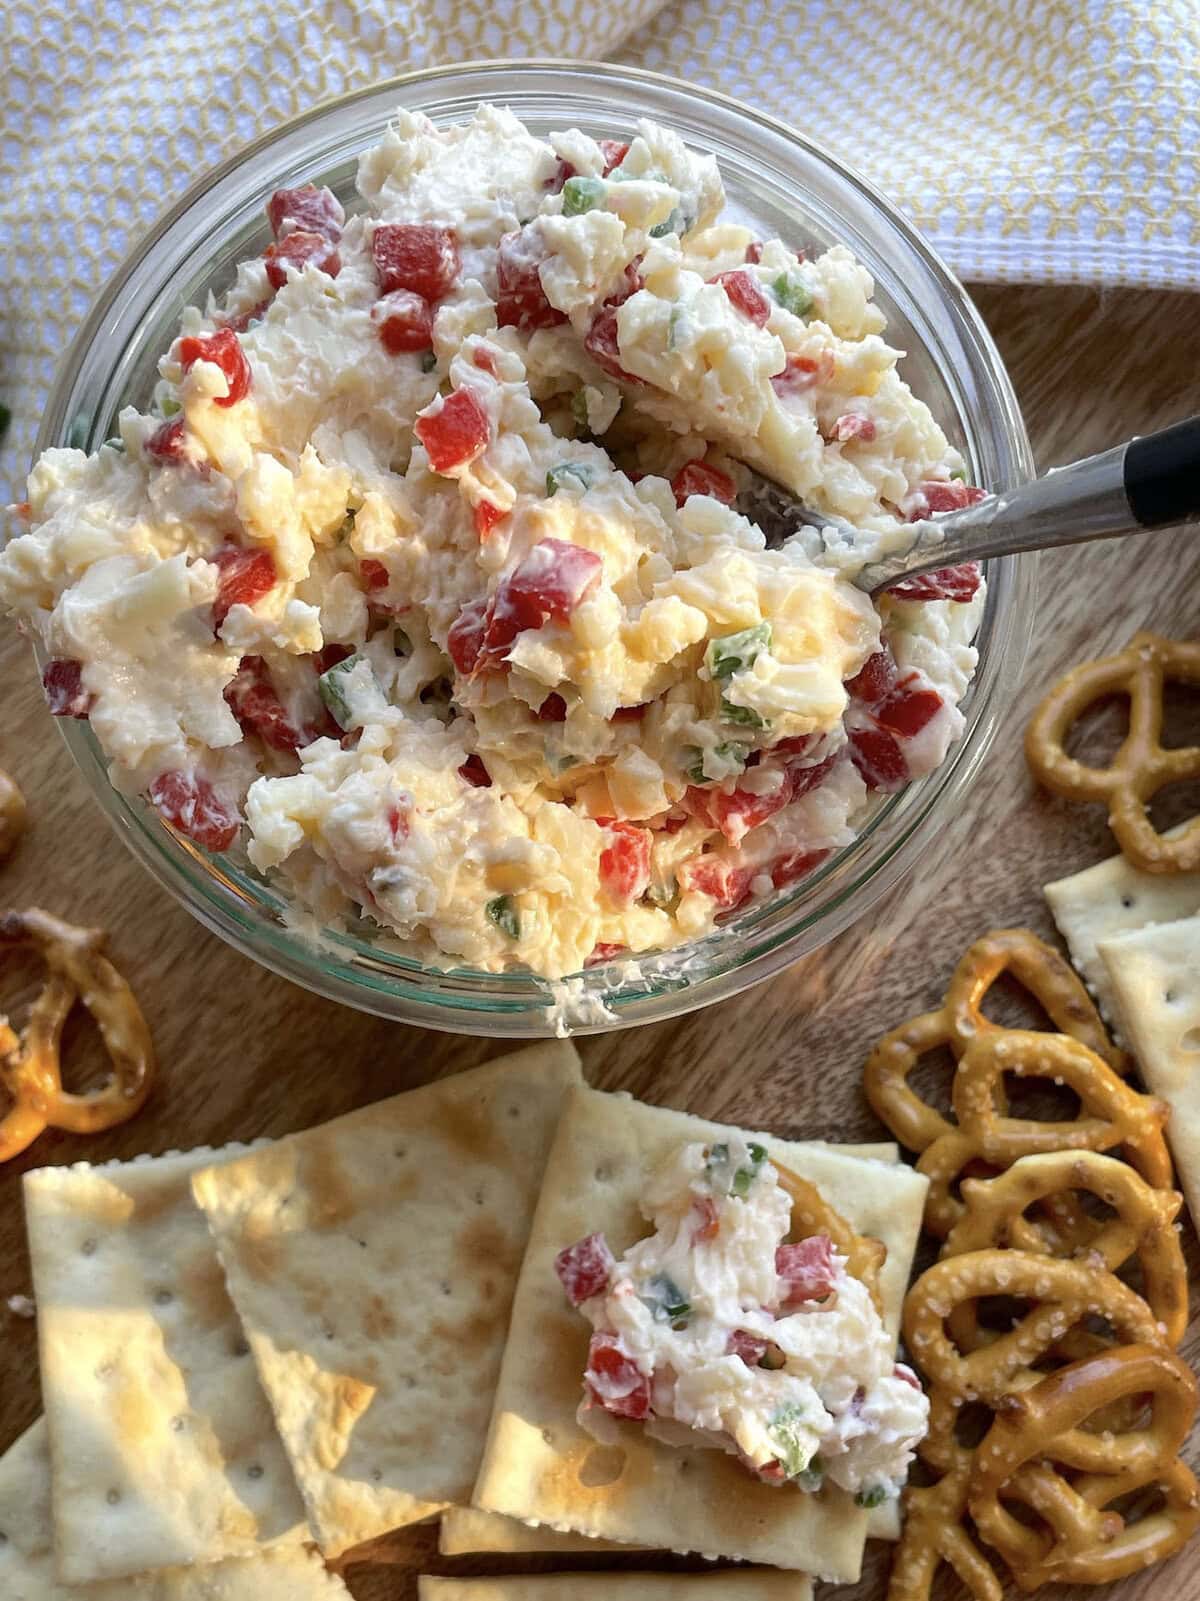 A jar of spicy pimento cheese surrounded by saltines and pretzels.